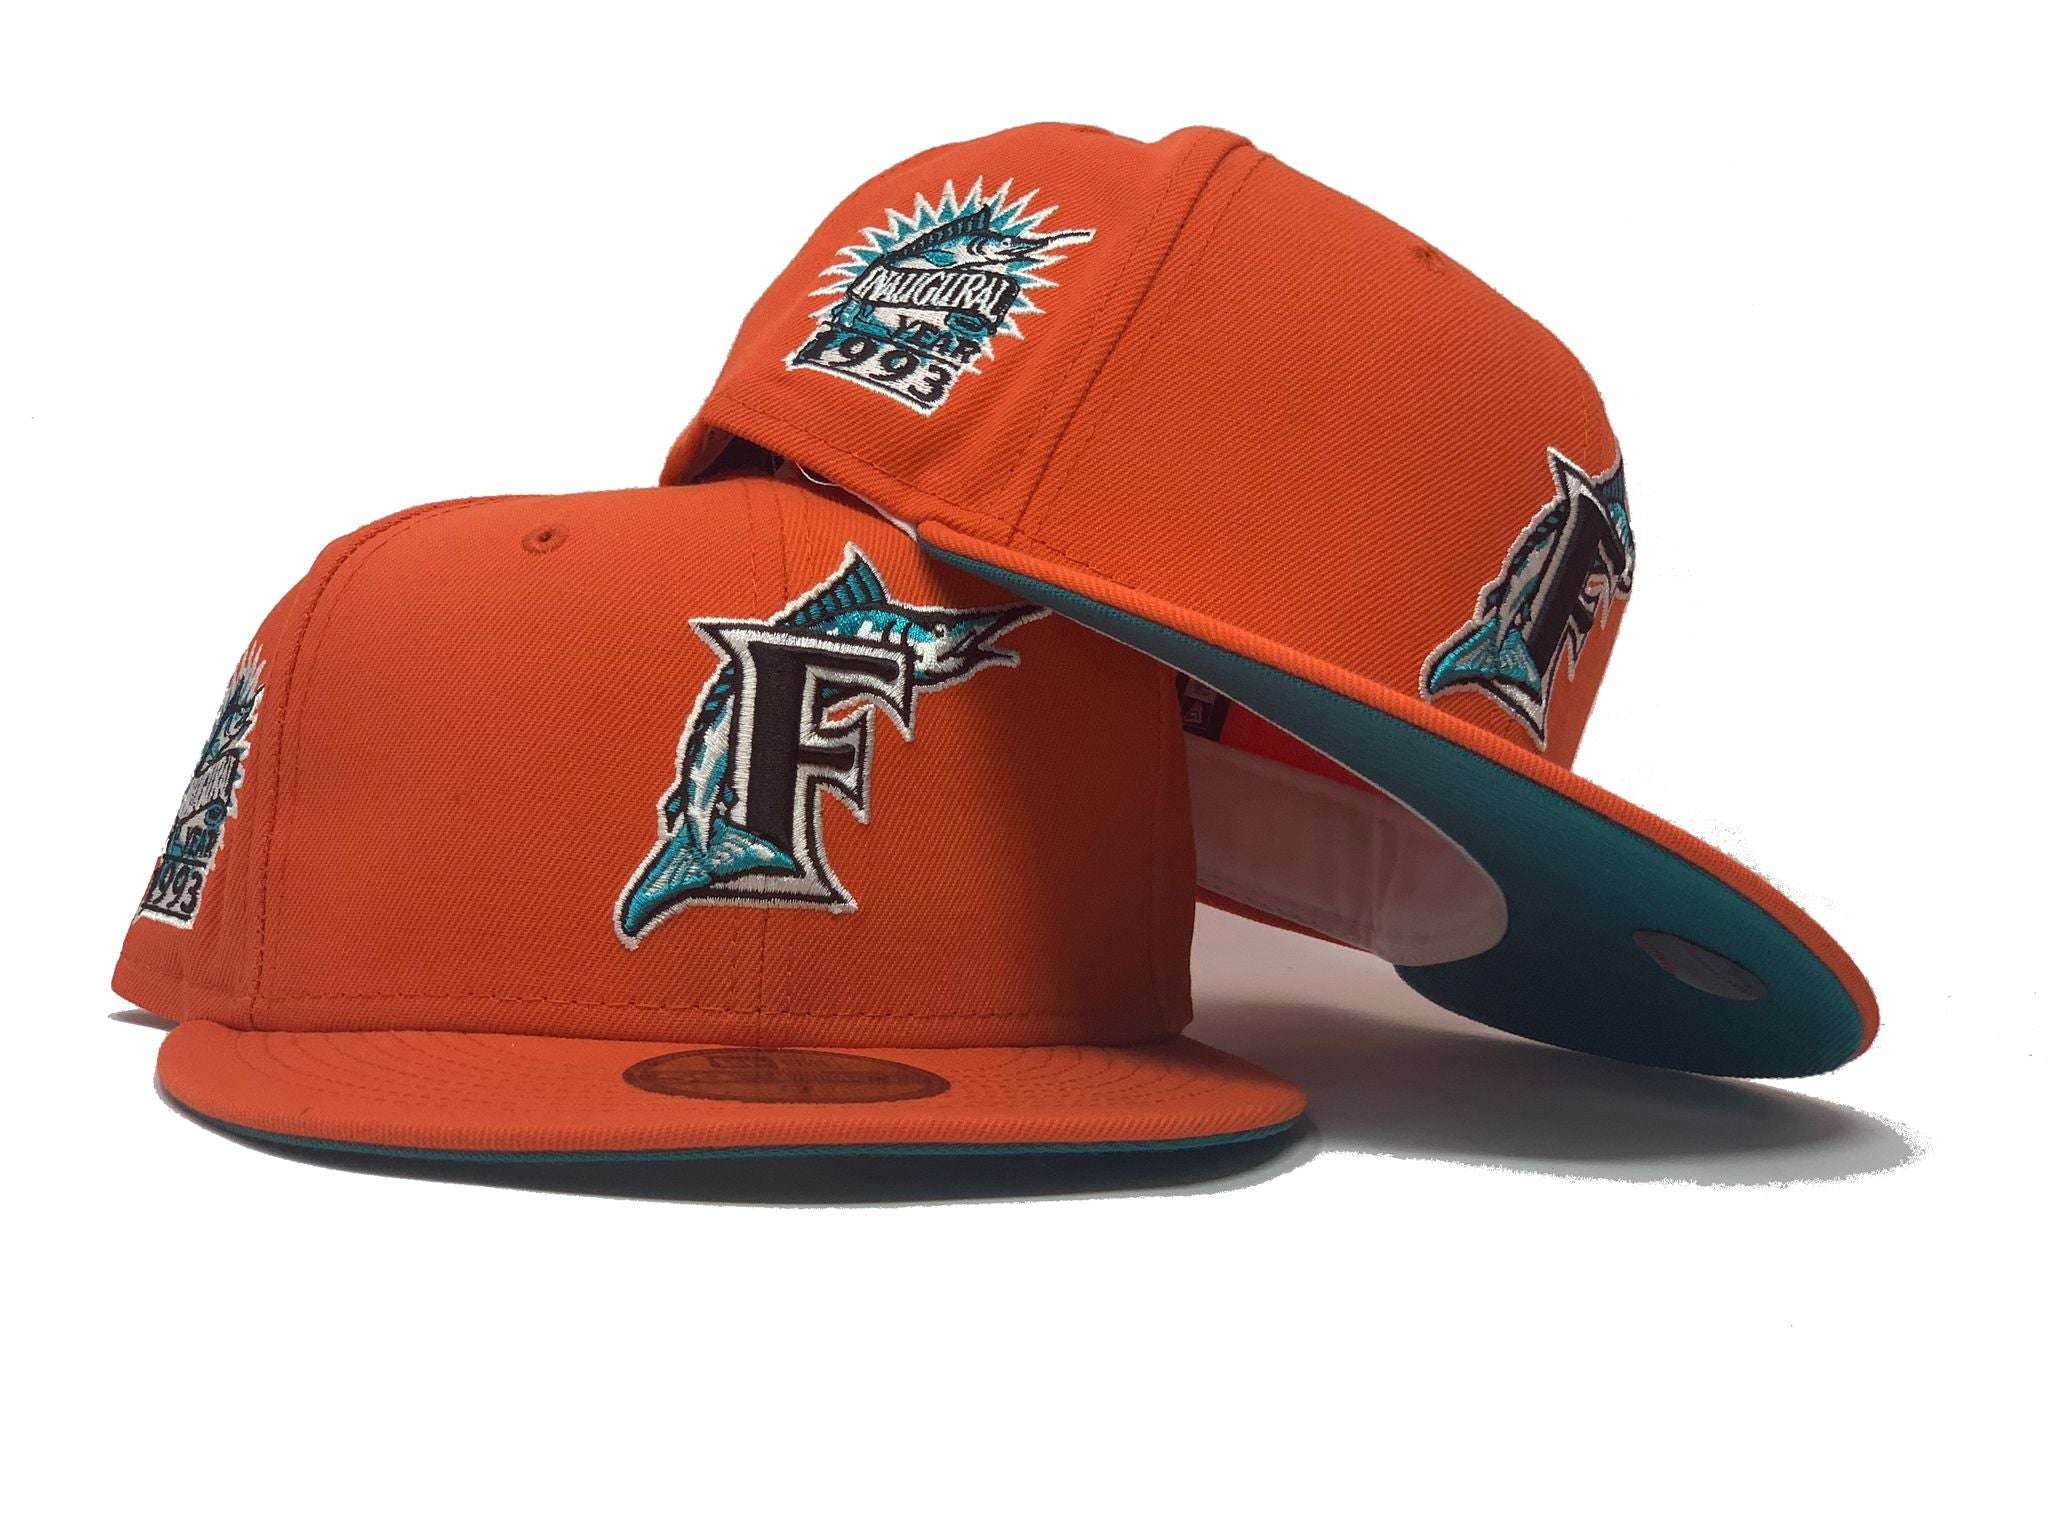 Florida Marlins 1995 COOPERSTOWN ROAD Fitted Hat by New Era